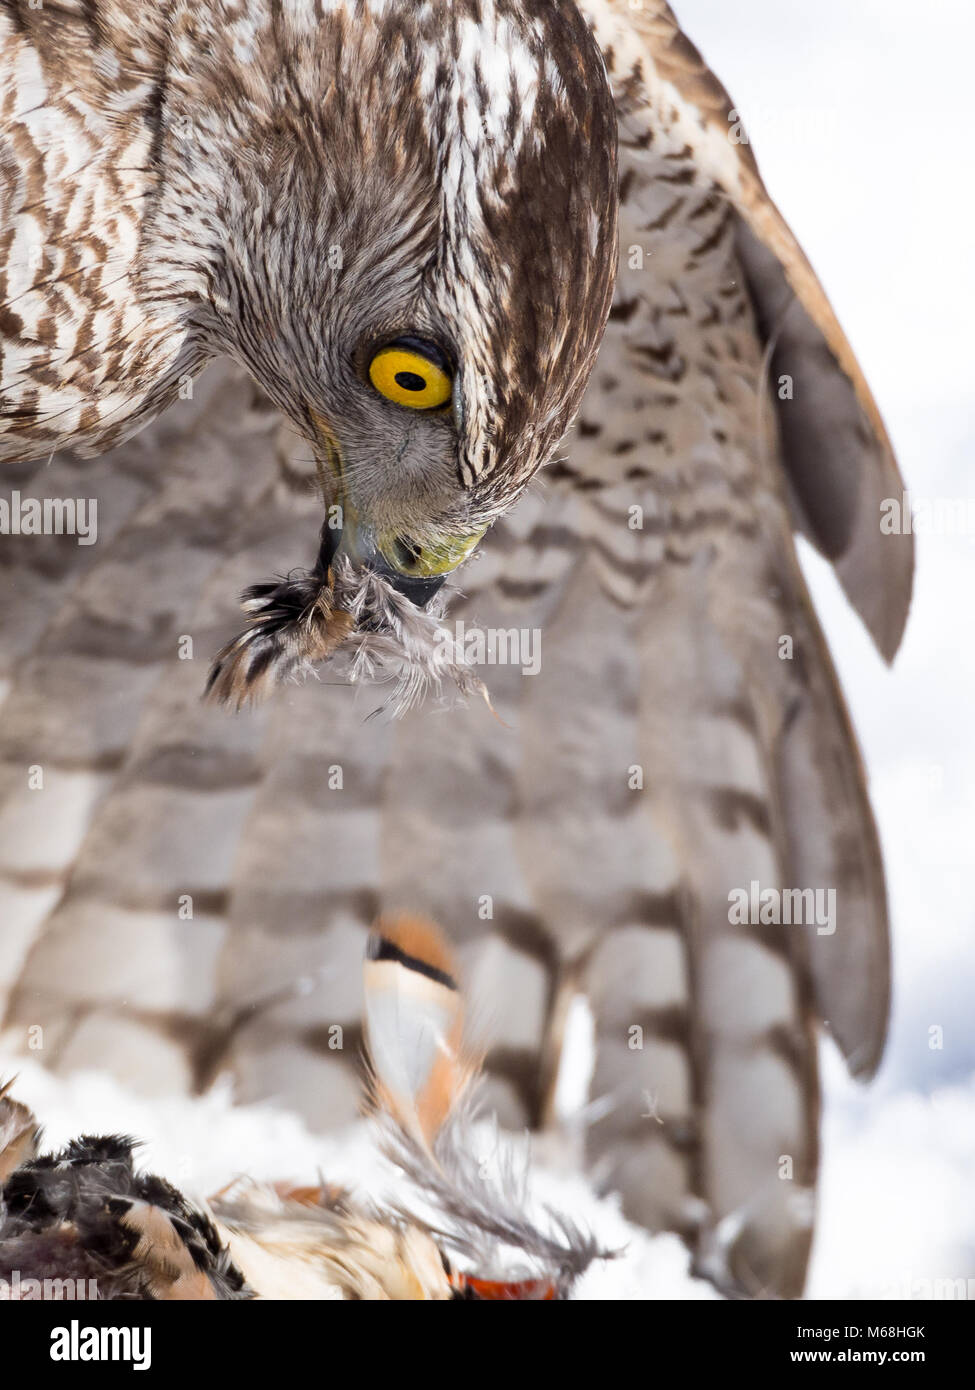 Northern goshawk (Accipiter gentilis) hunting a partridge on the snow in winter in a falconry exhibition Stock Photo